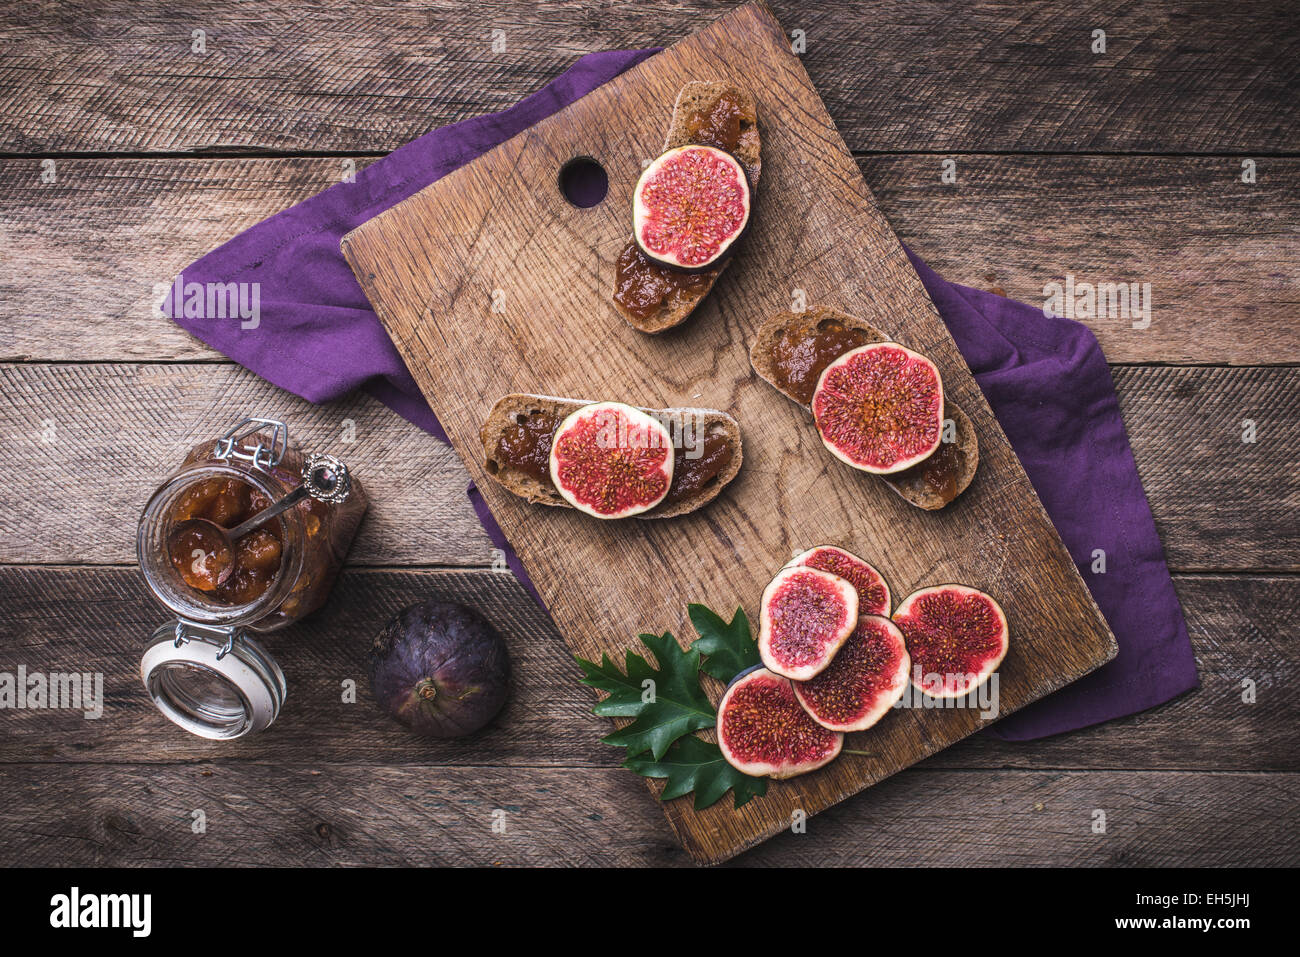 Sliced figs and bread with jam on choppingboard in rustic style. Autumn season food photo Stock Photo